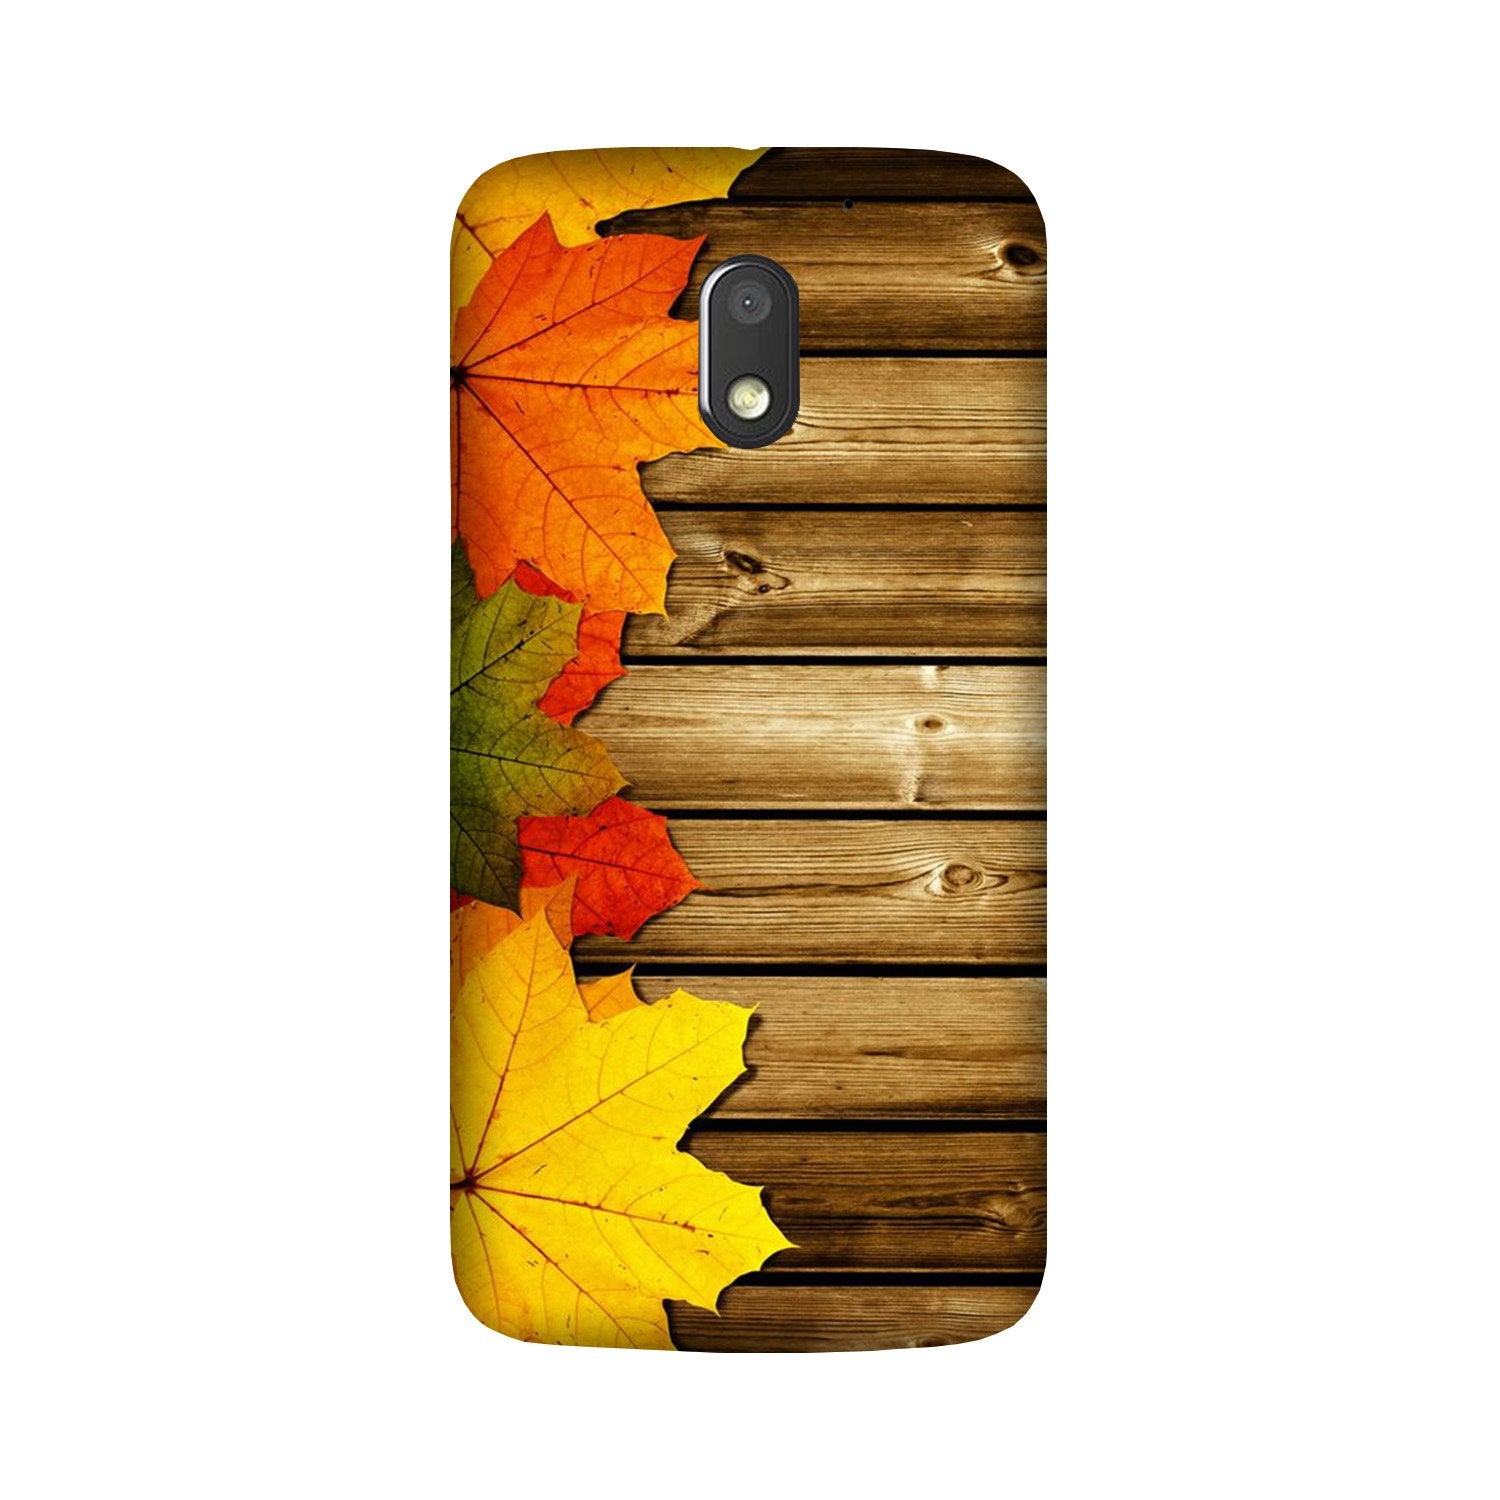 Wooden look3 Case for Moto G4 Play